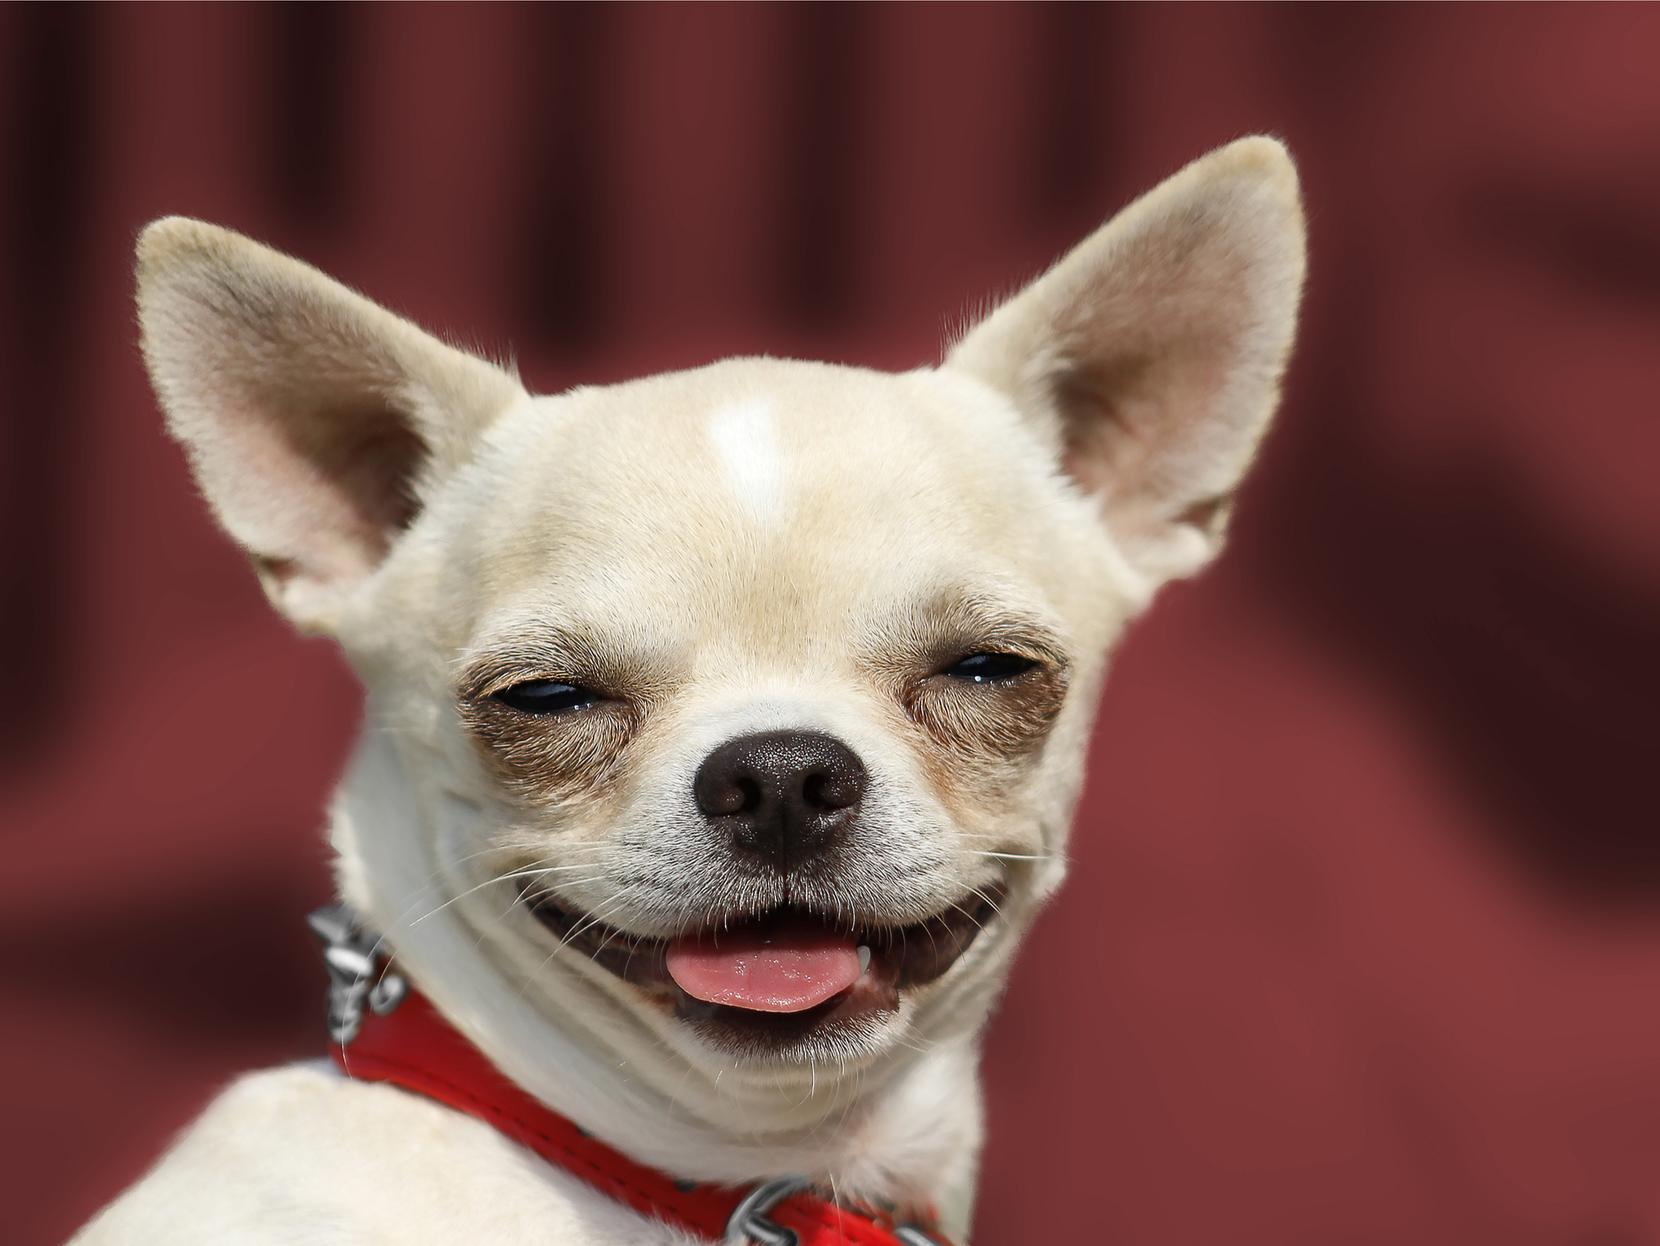 Chihuahuas may be cute, but they rank as the third most likeliest breed to misbehave